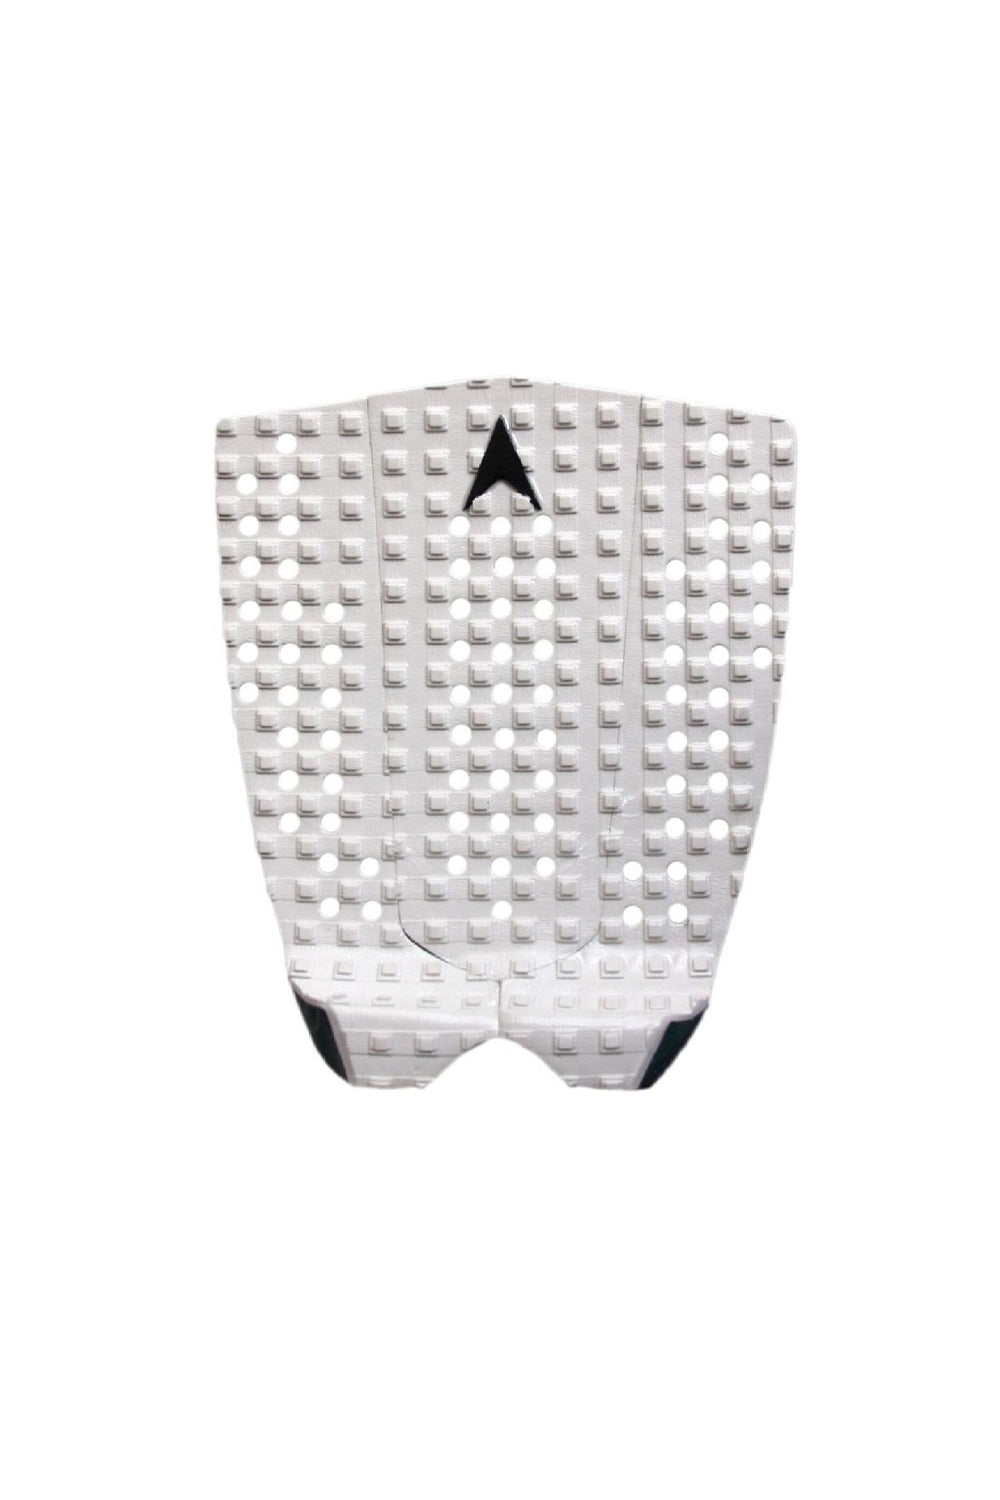 Astro Deck Flat & Fast - White Grip Pad Traction